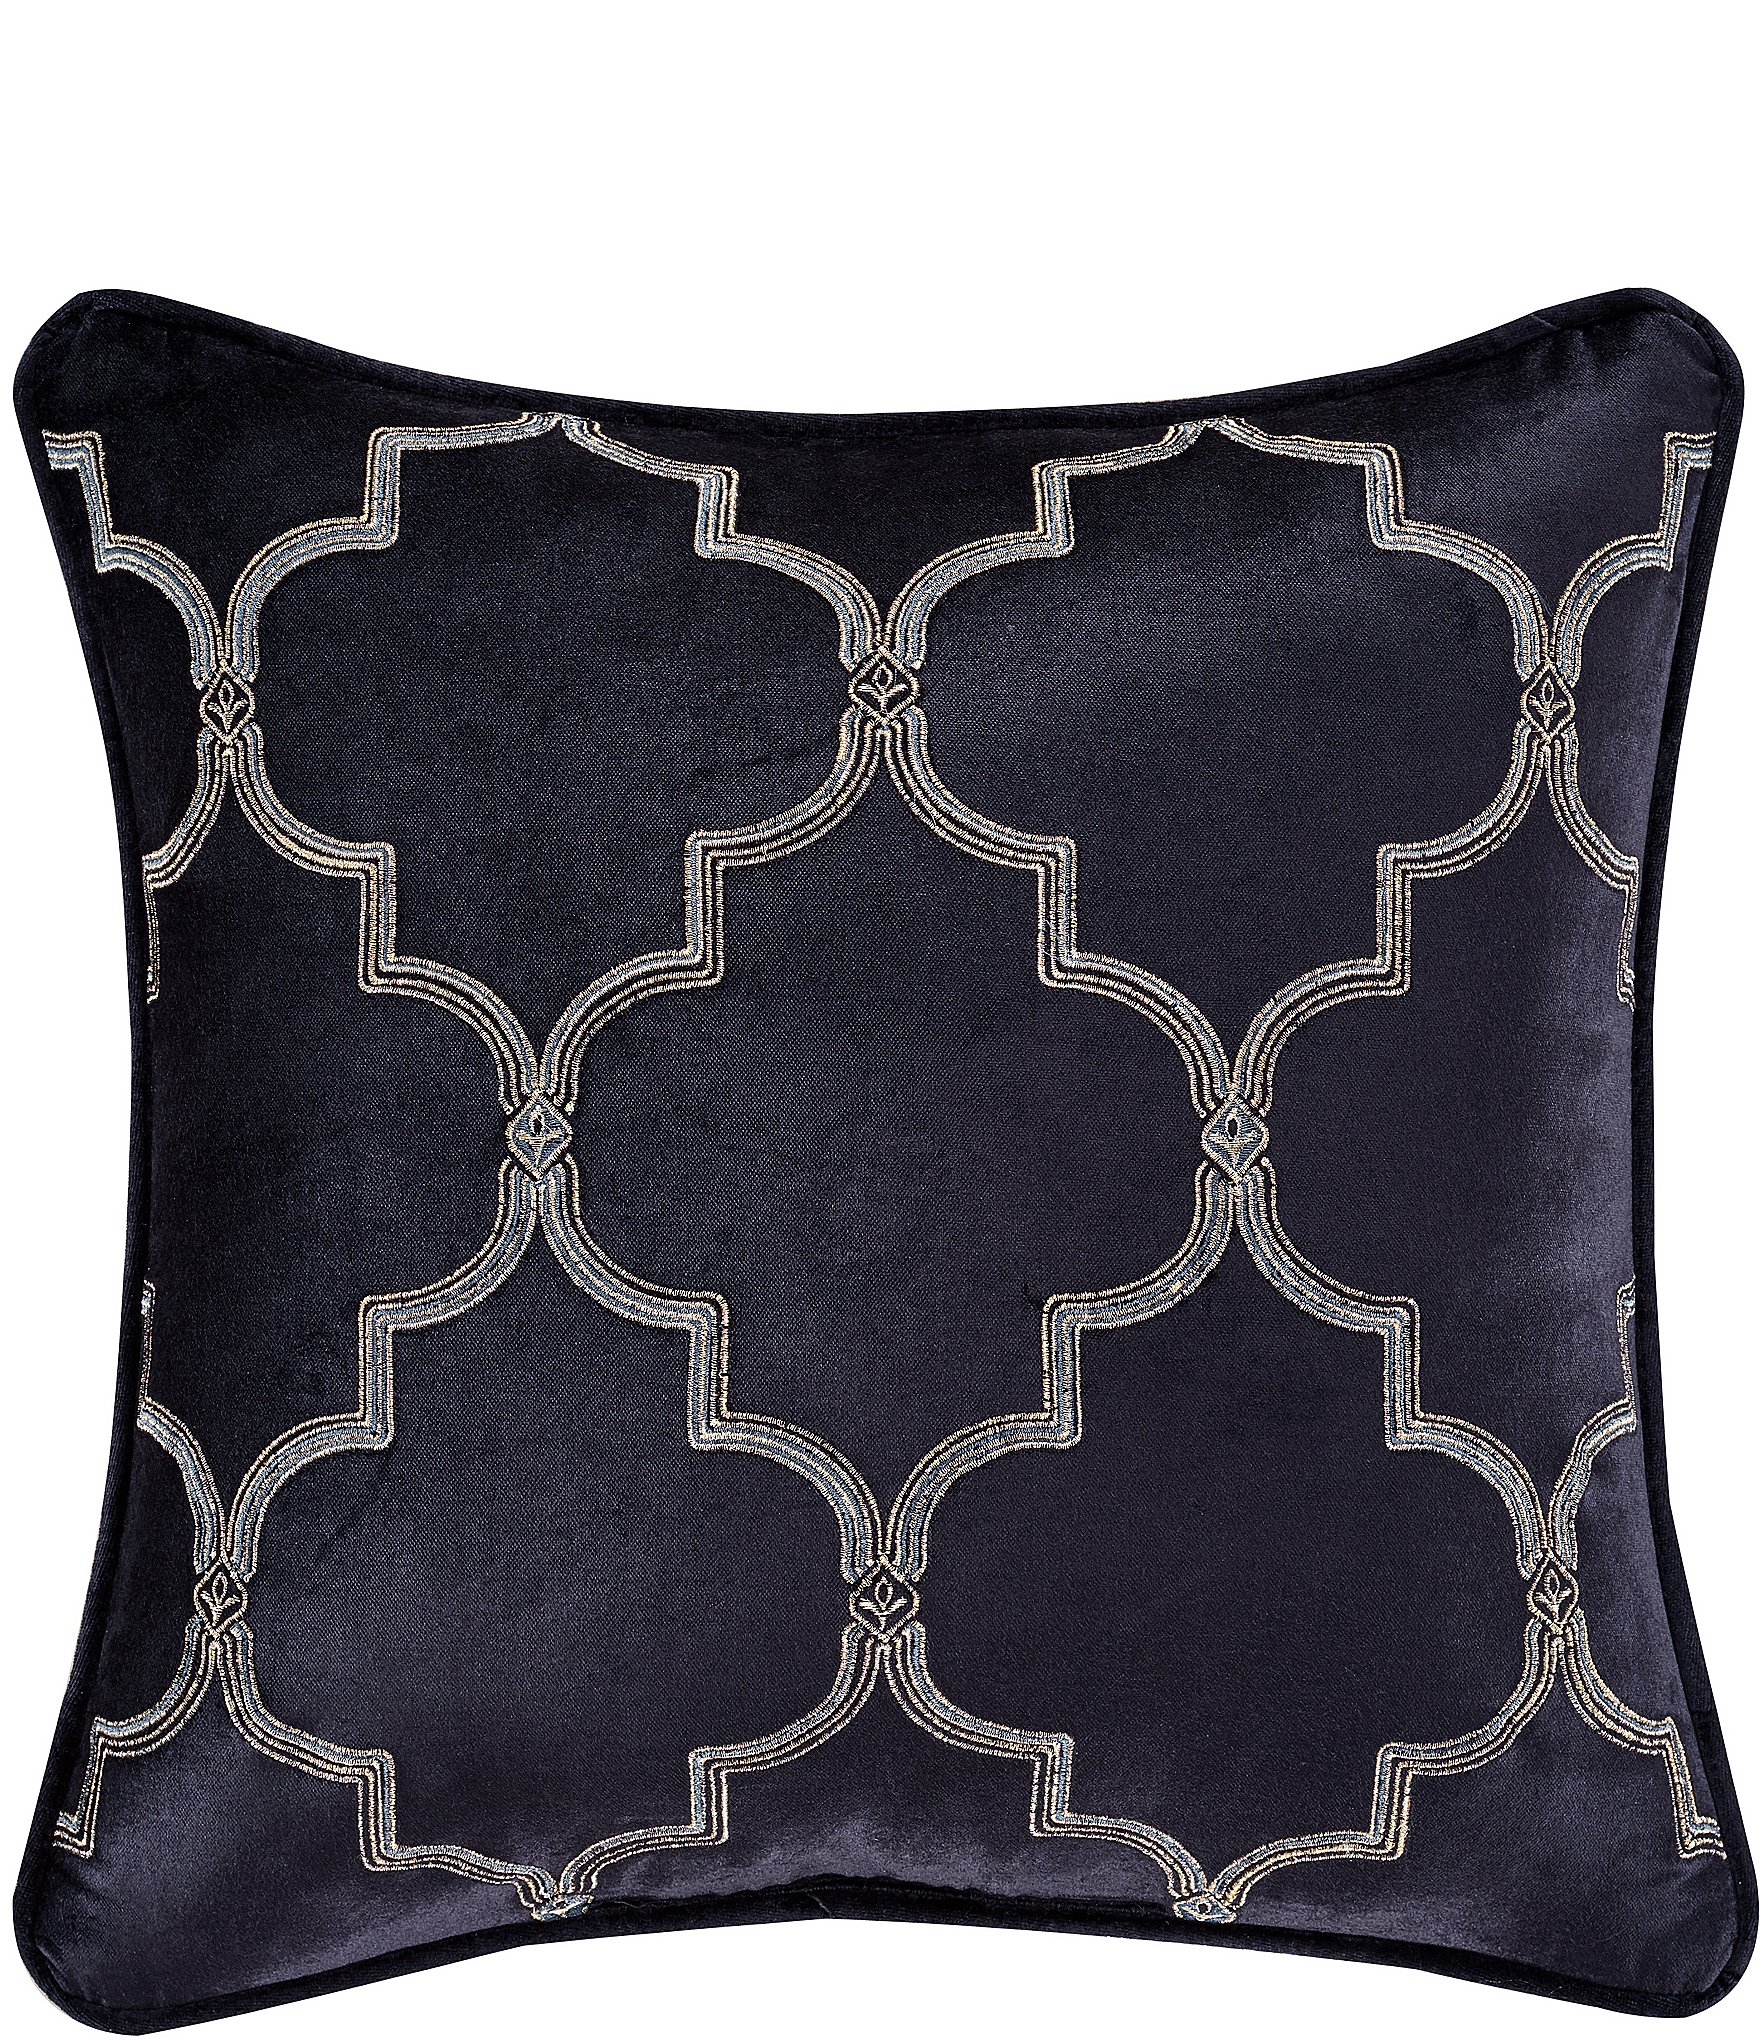 J. Queen New York Middlebury Square Embellished Pillow | Dillard's